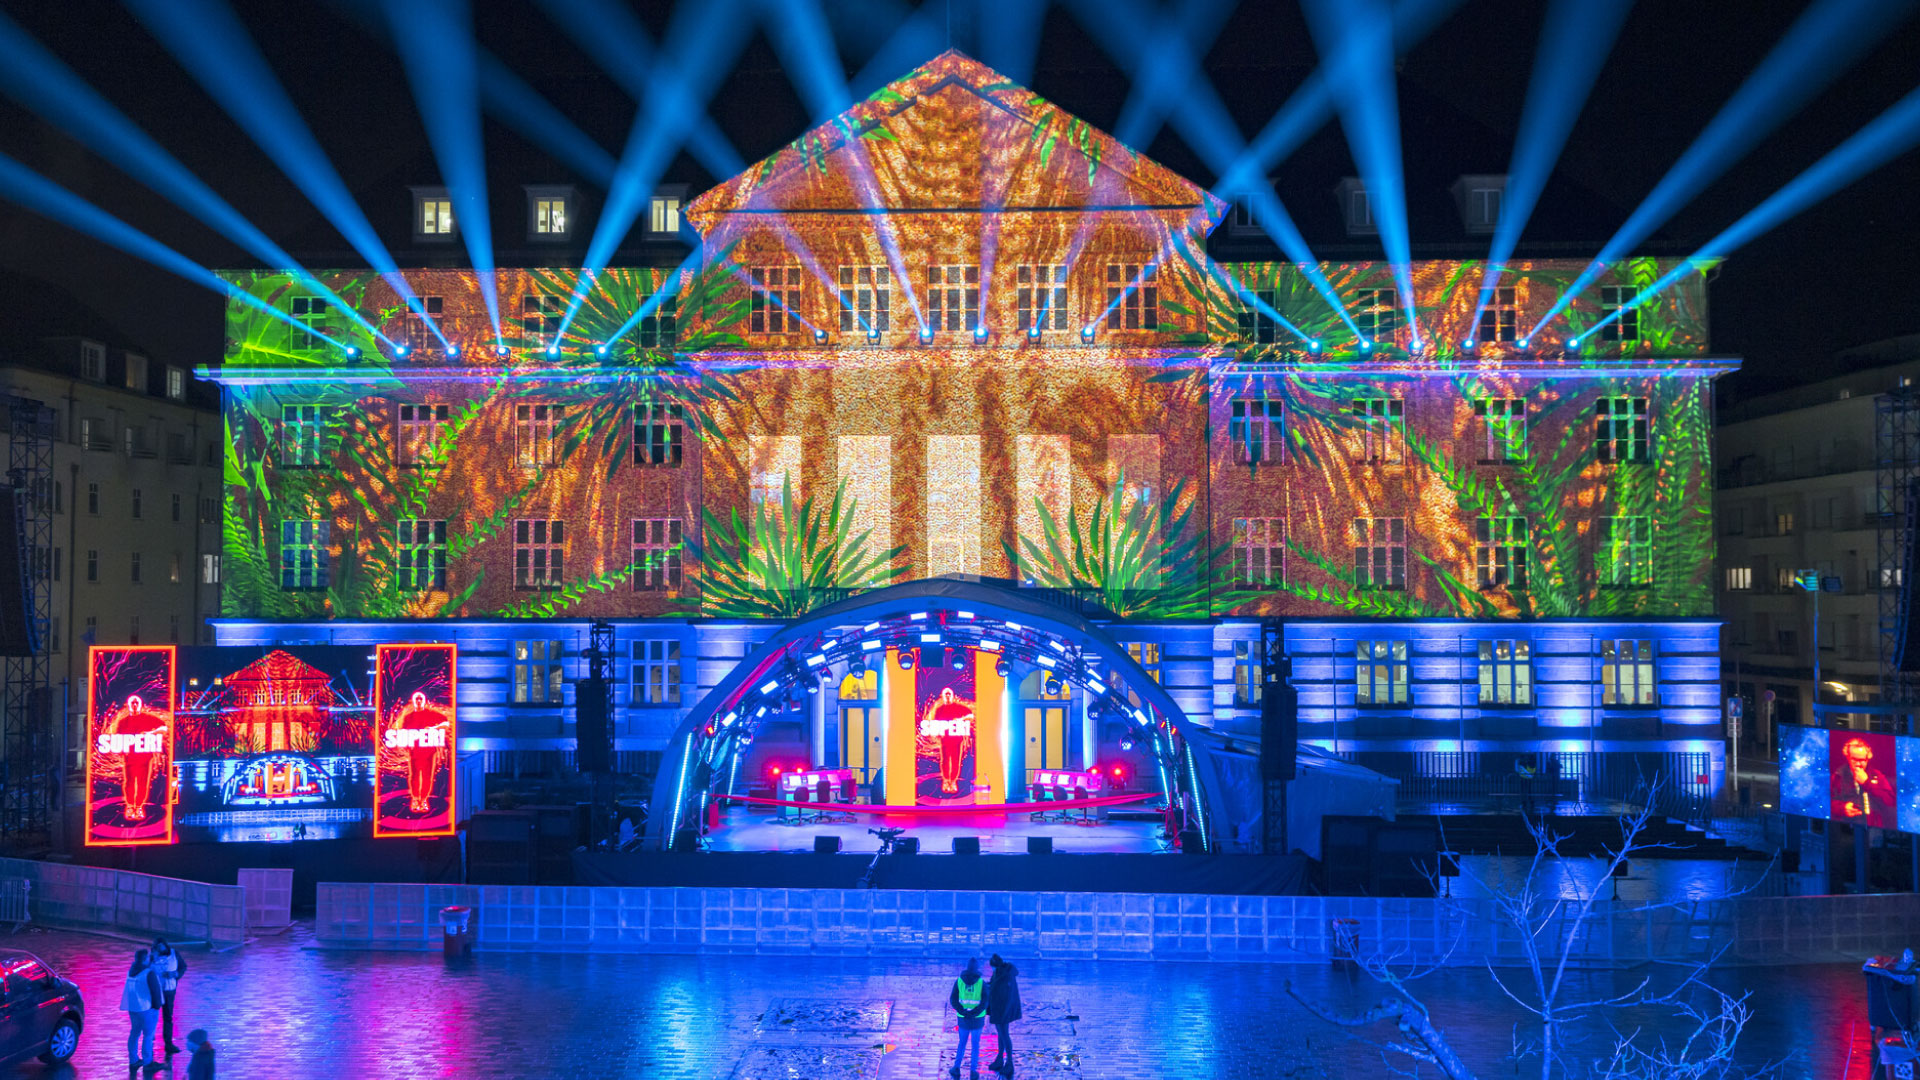 First-class projection mapping by PRG in Esch. Contact our video experts at PRG